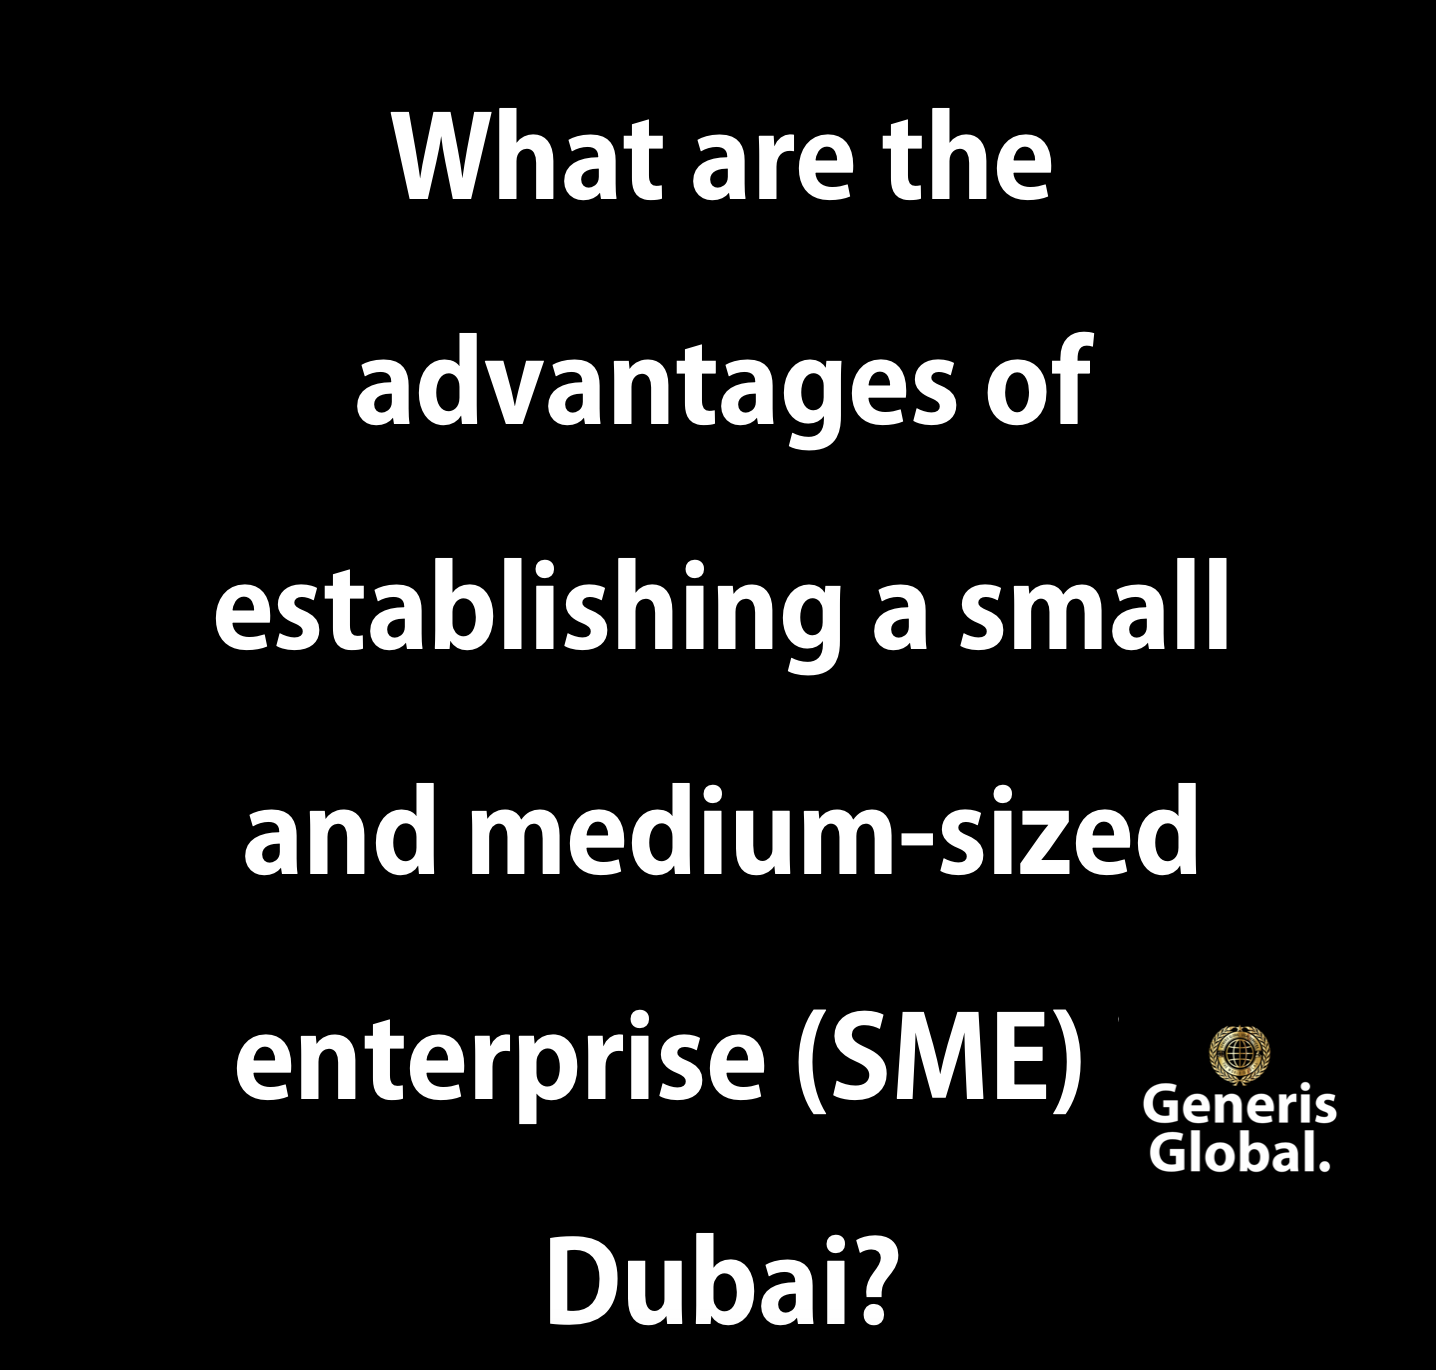 What are the advantages of establishing a small and medium-sized enterprise (SME) in Dubai?